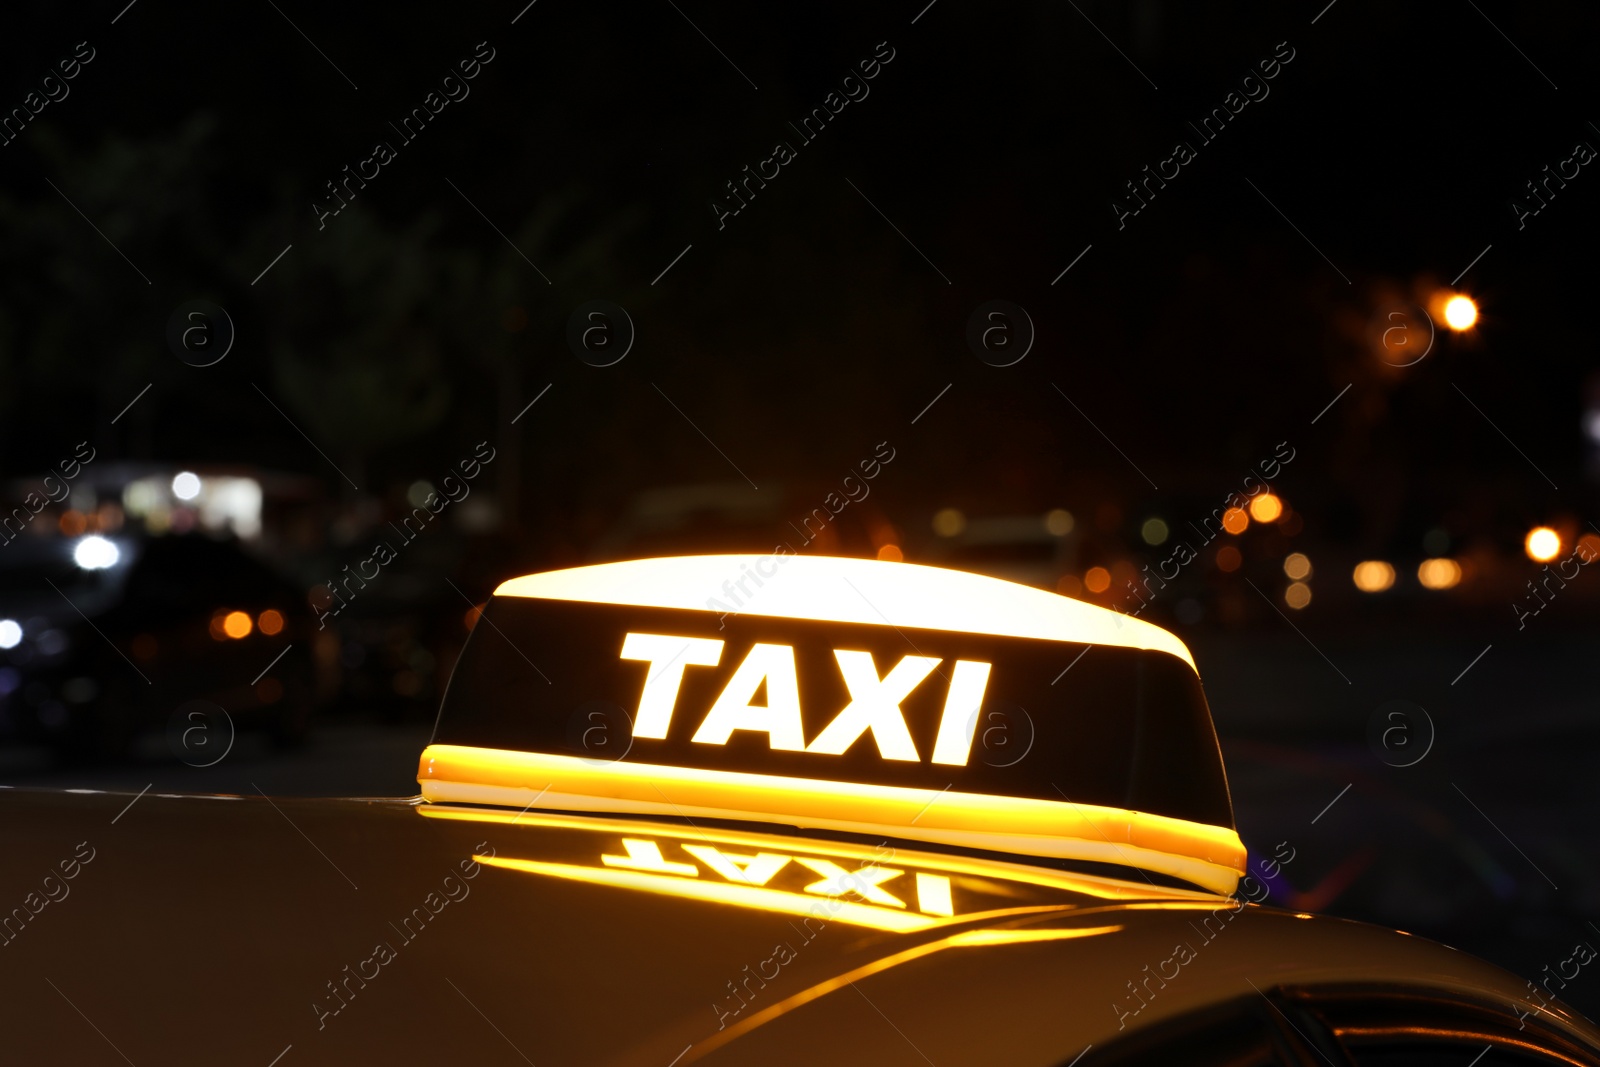 Photo of Taxi car with yellow sign outdoors at night